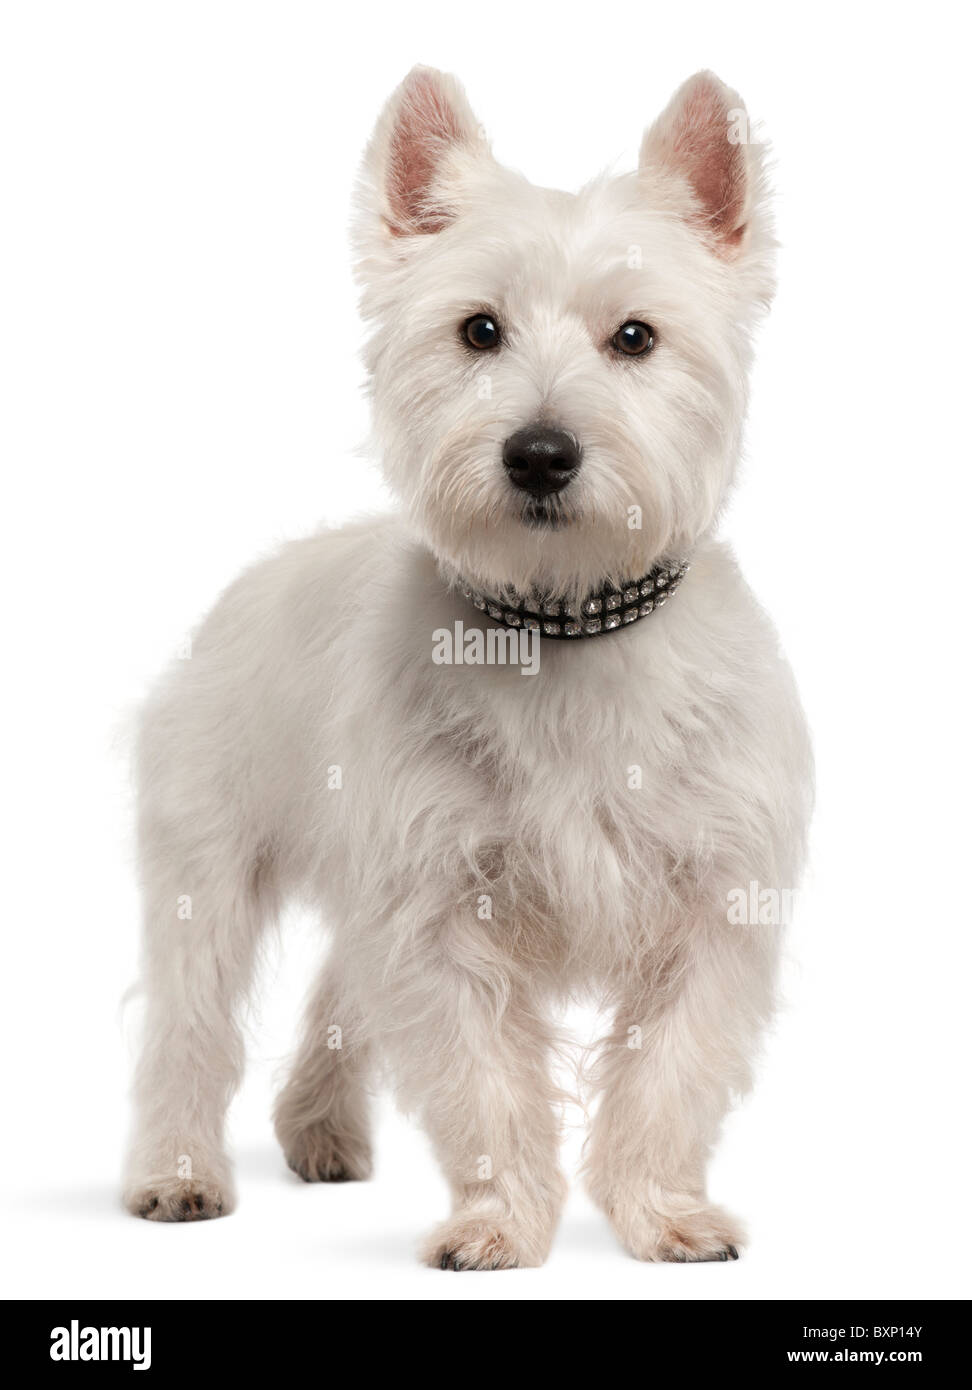 West Highland White Terrier dog, 8 months old, standing in front of white  background Stock Photo - Alamy